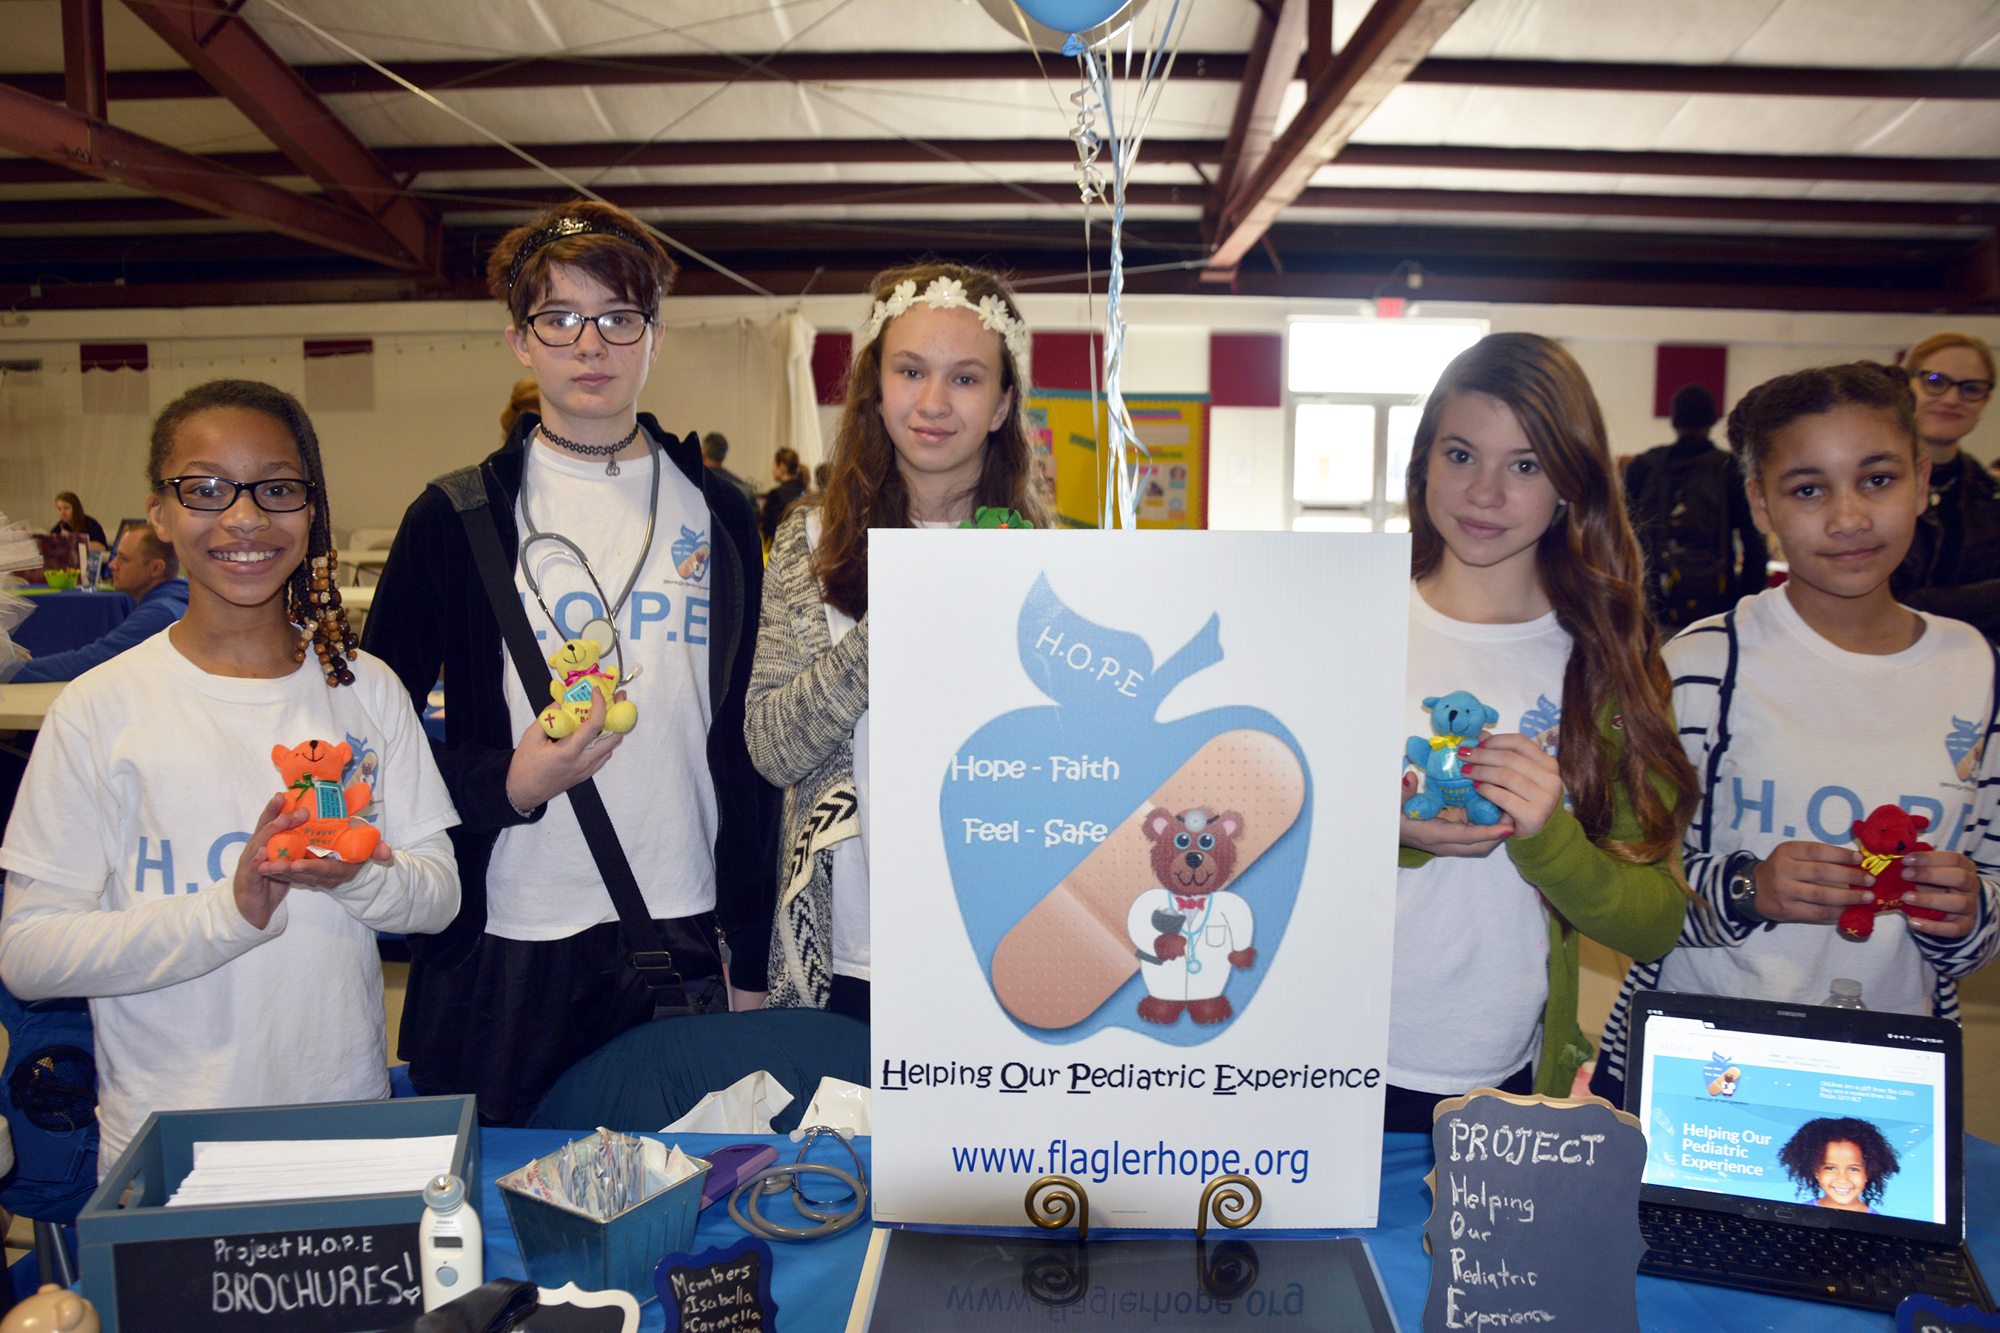 Bunnell Elementary students Karissa Jackson, Isabella Miller, Carmella Sweeney, Hope Romaine and Christina Courson developed the organization Flagler HOPE to improve the pediatric experience for Flagler County kids.